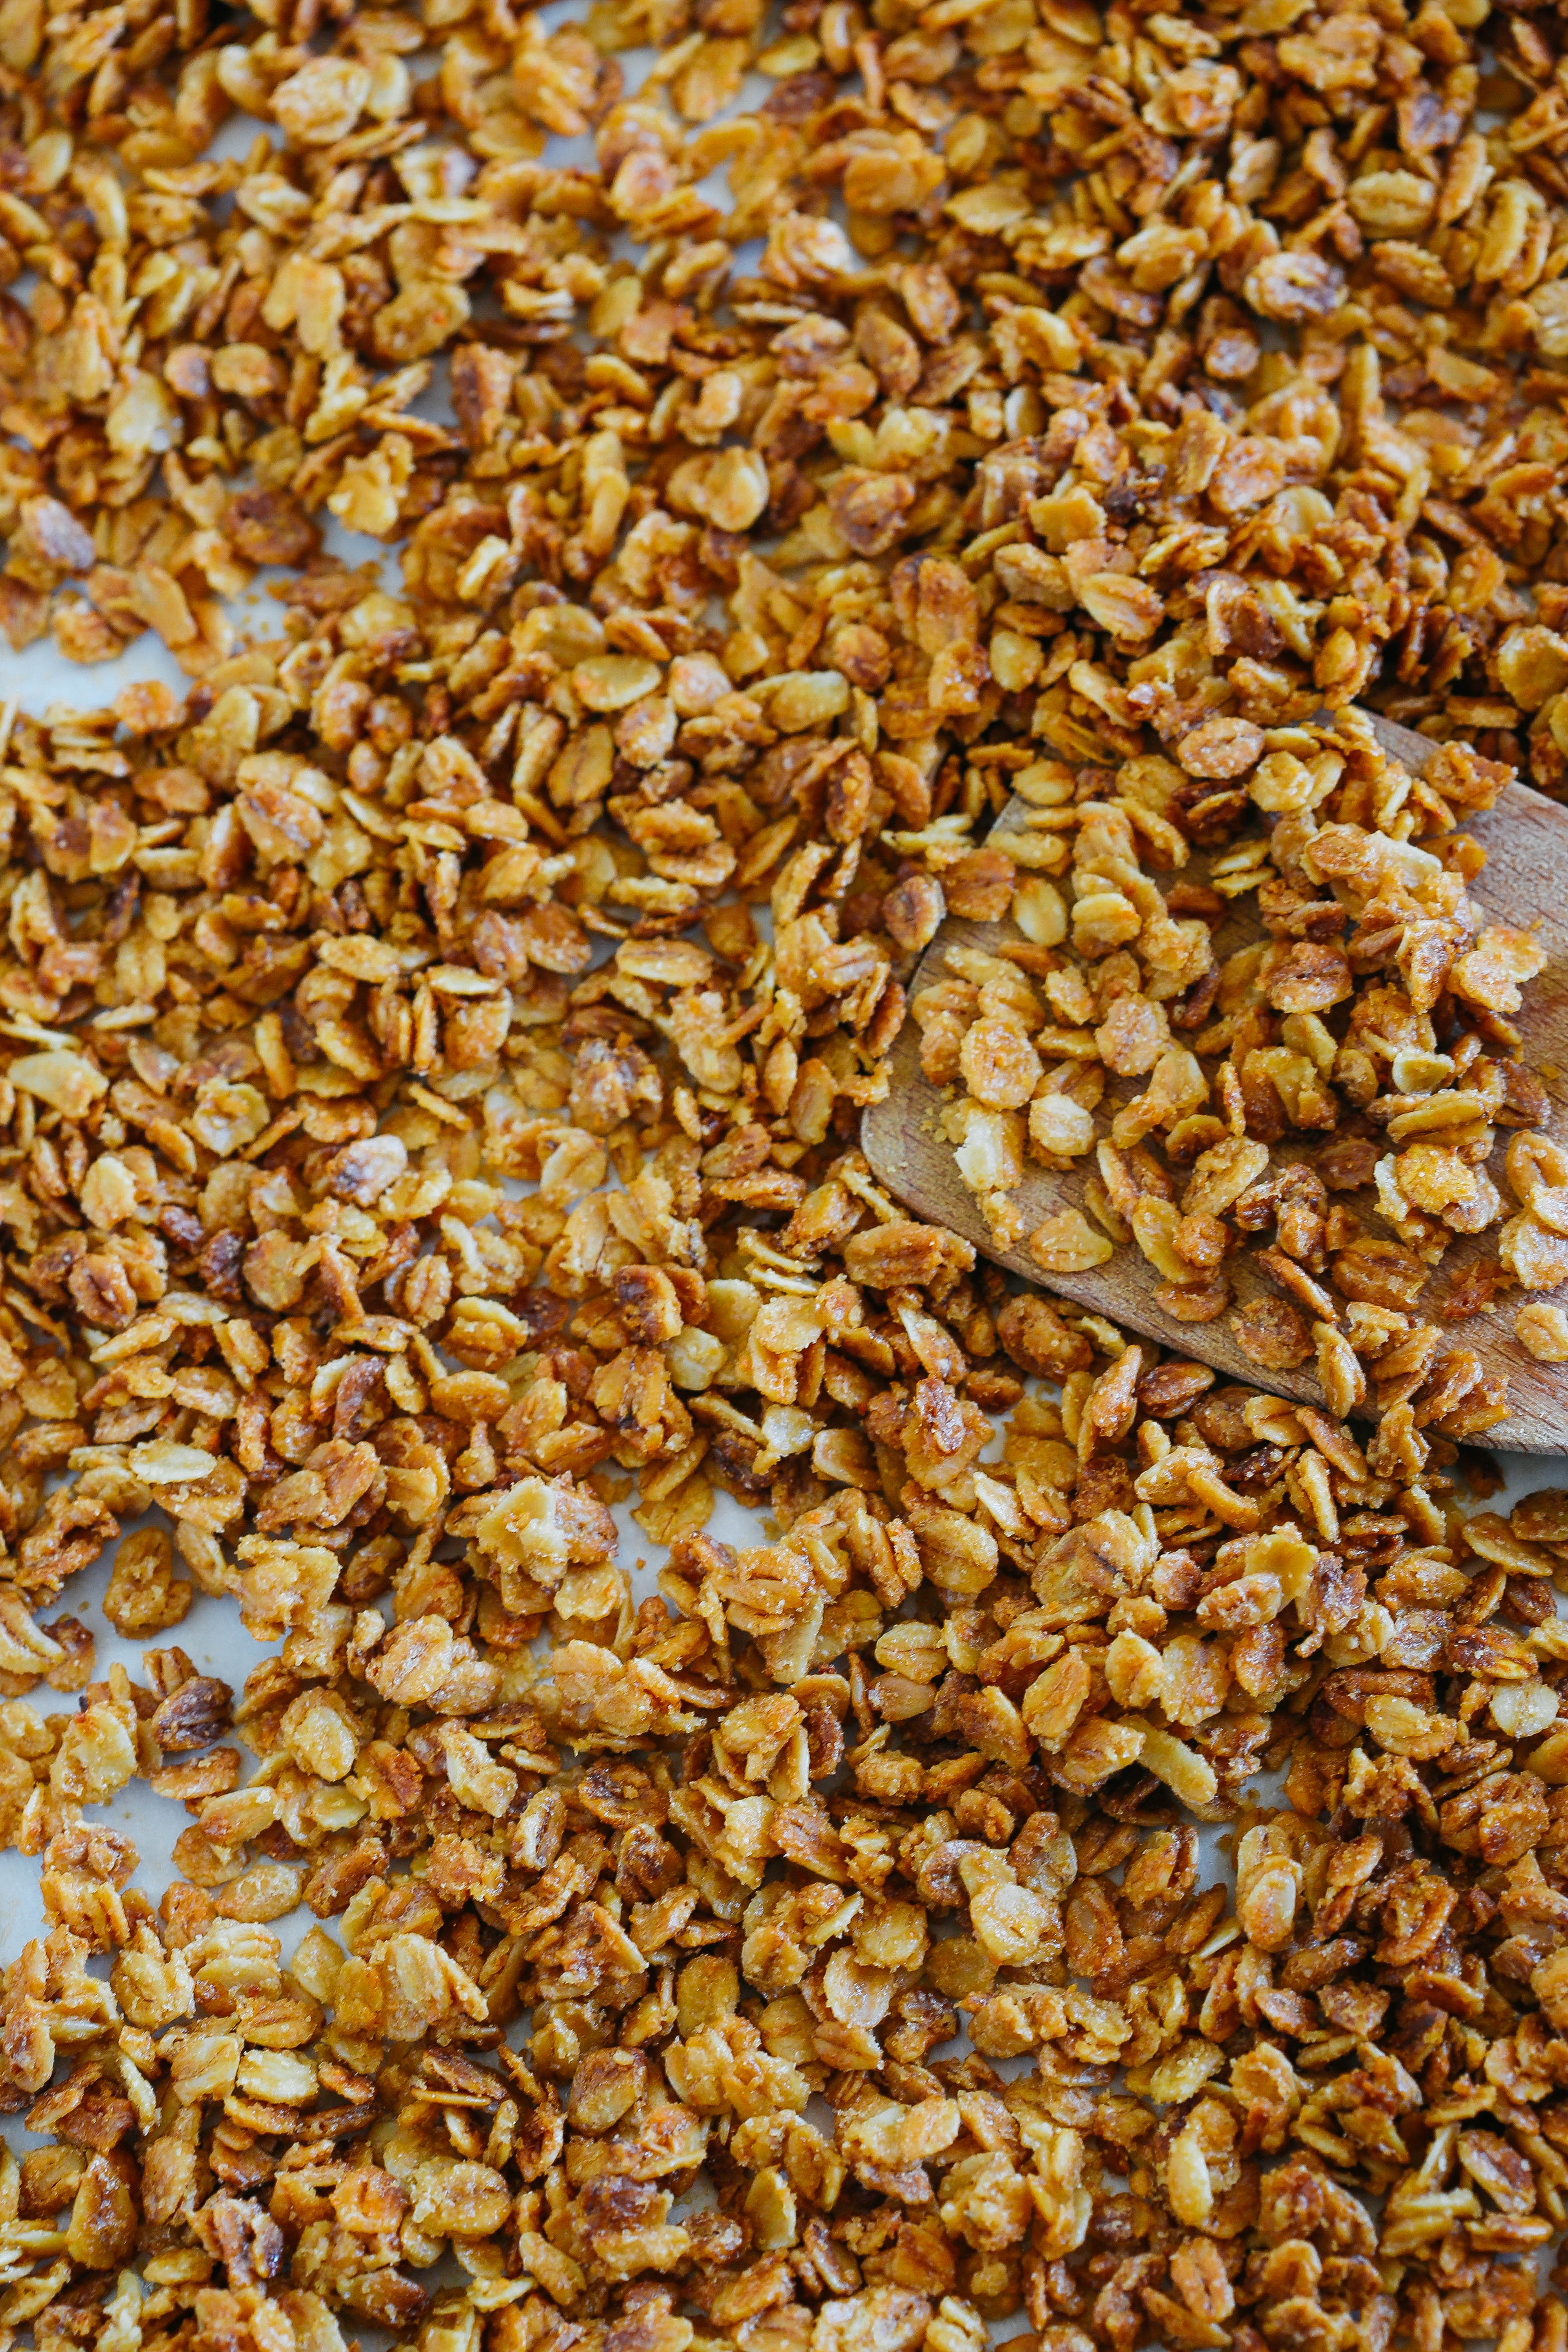 My favorite go-to granola recipe that is EASY to make and only requires three simple ingredients!  The perfect basic recipe that you can make all your own!